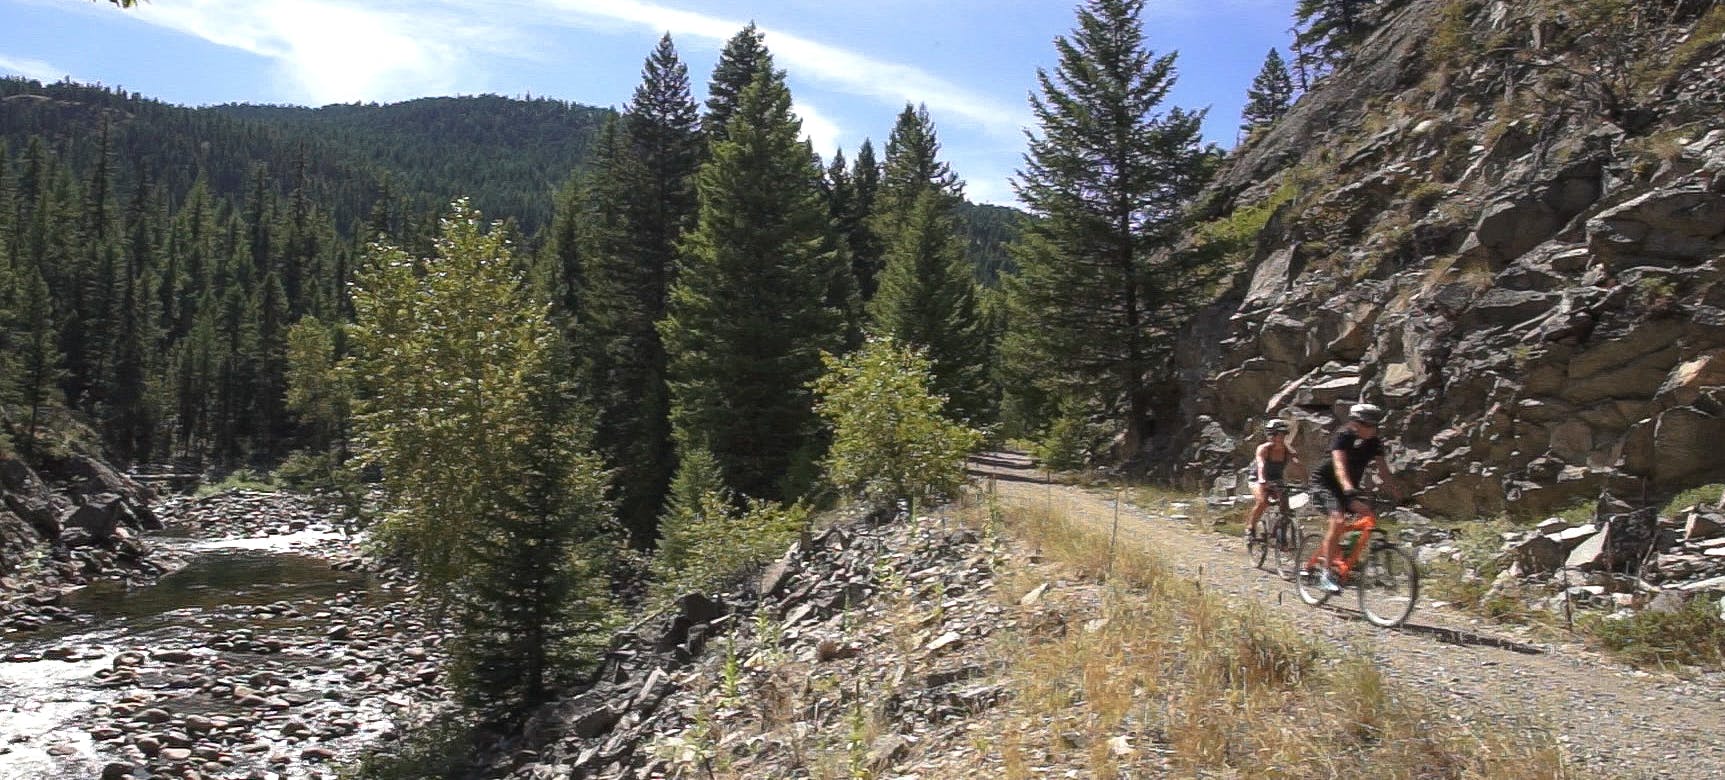 Two mountain bikers ride along the old Kettle Valley Rail grade on a summer day in the Boundary region of the Regional District of Kootenay Boundary